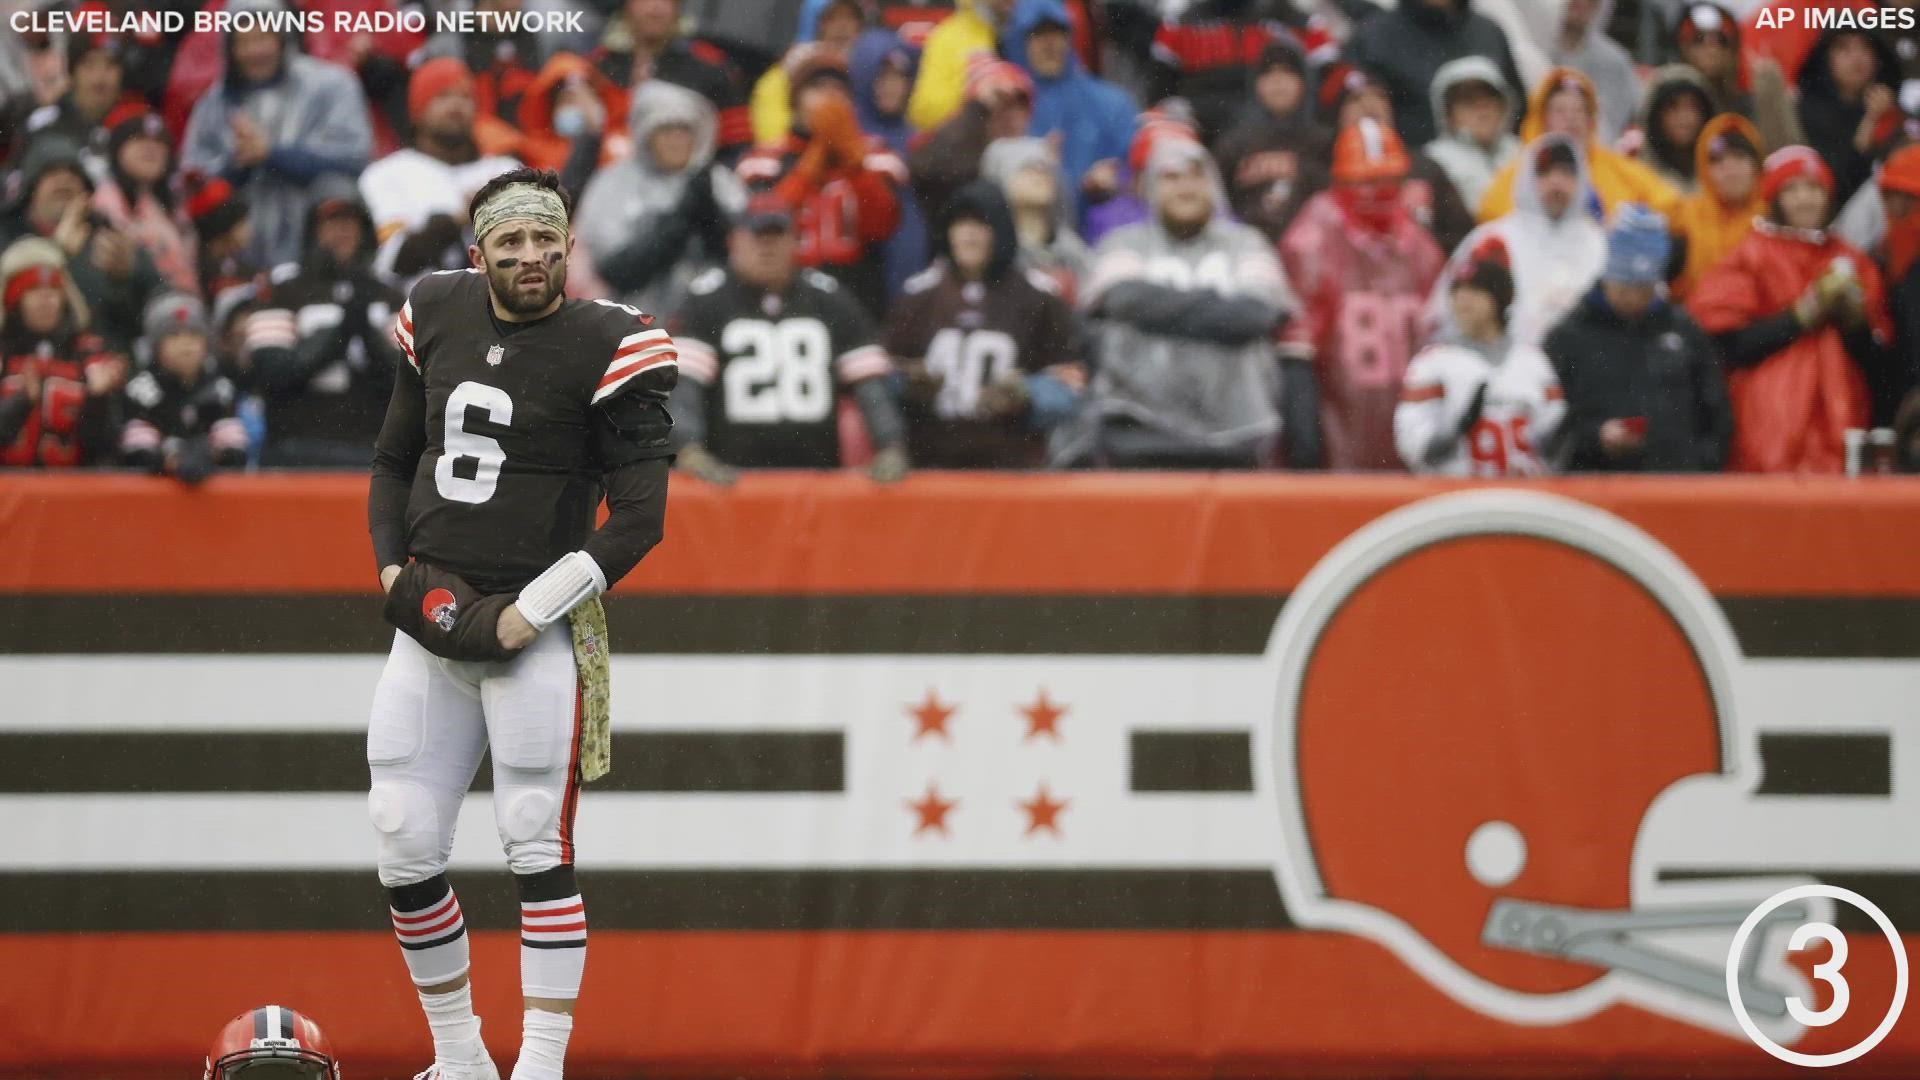 The Browns overcame sloppy play on all fronts Sunday to survive the winless Detroit Lions 13-10.